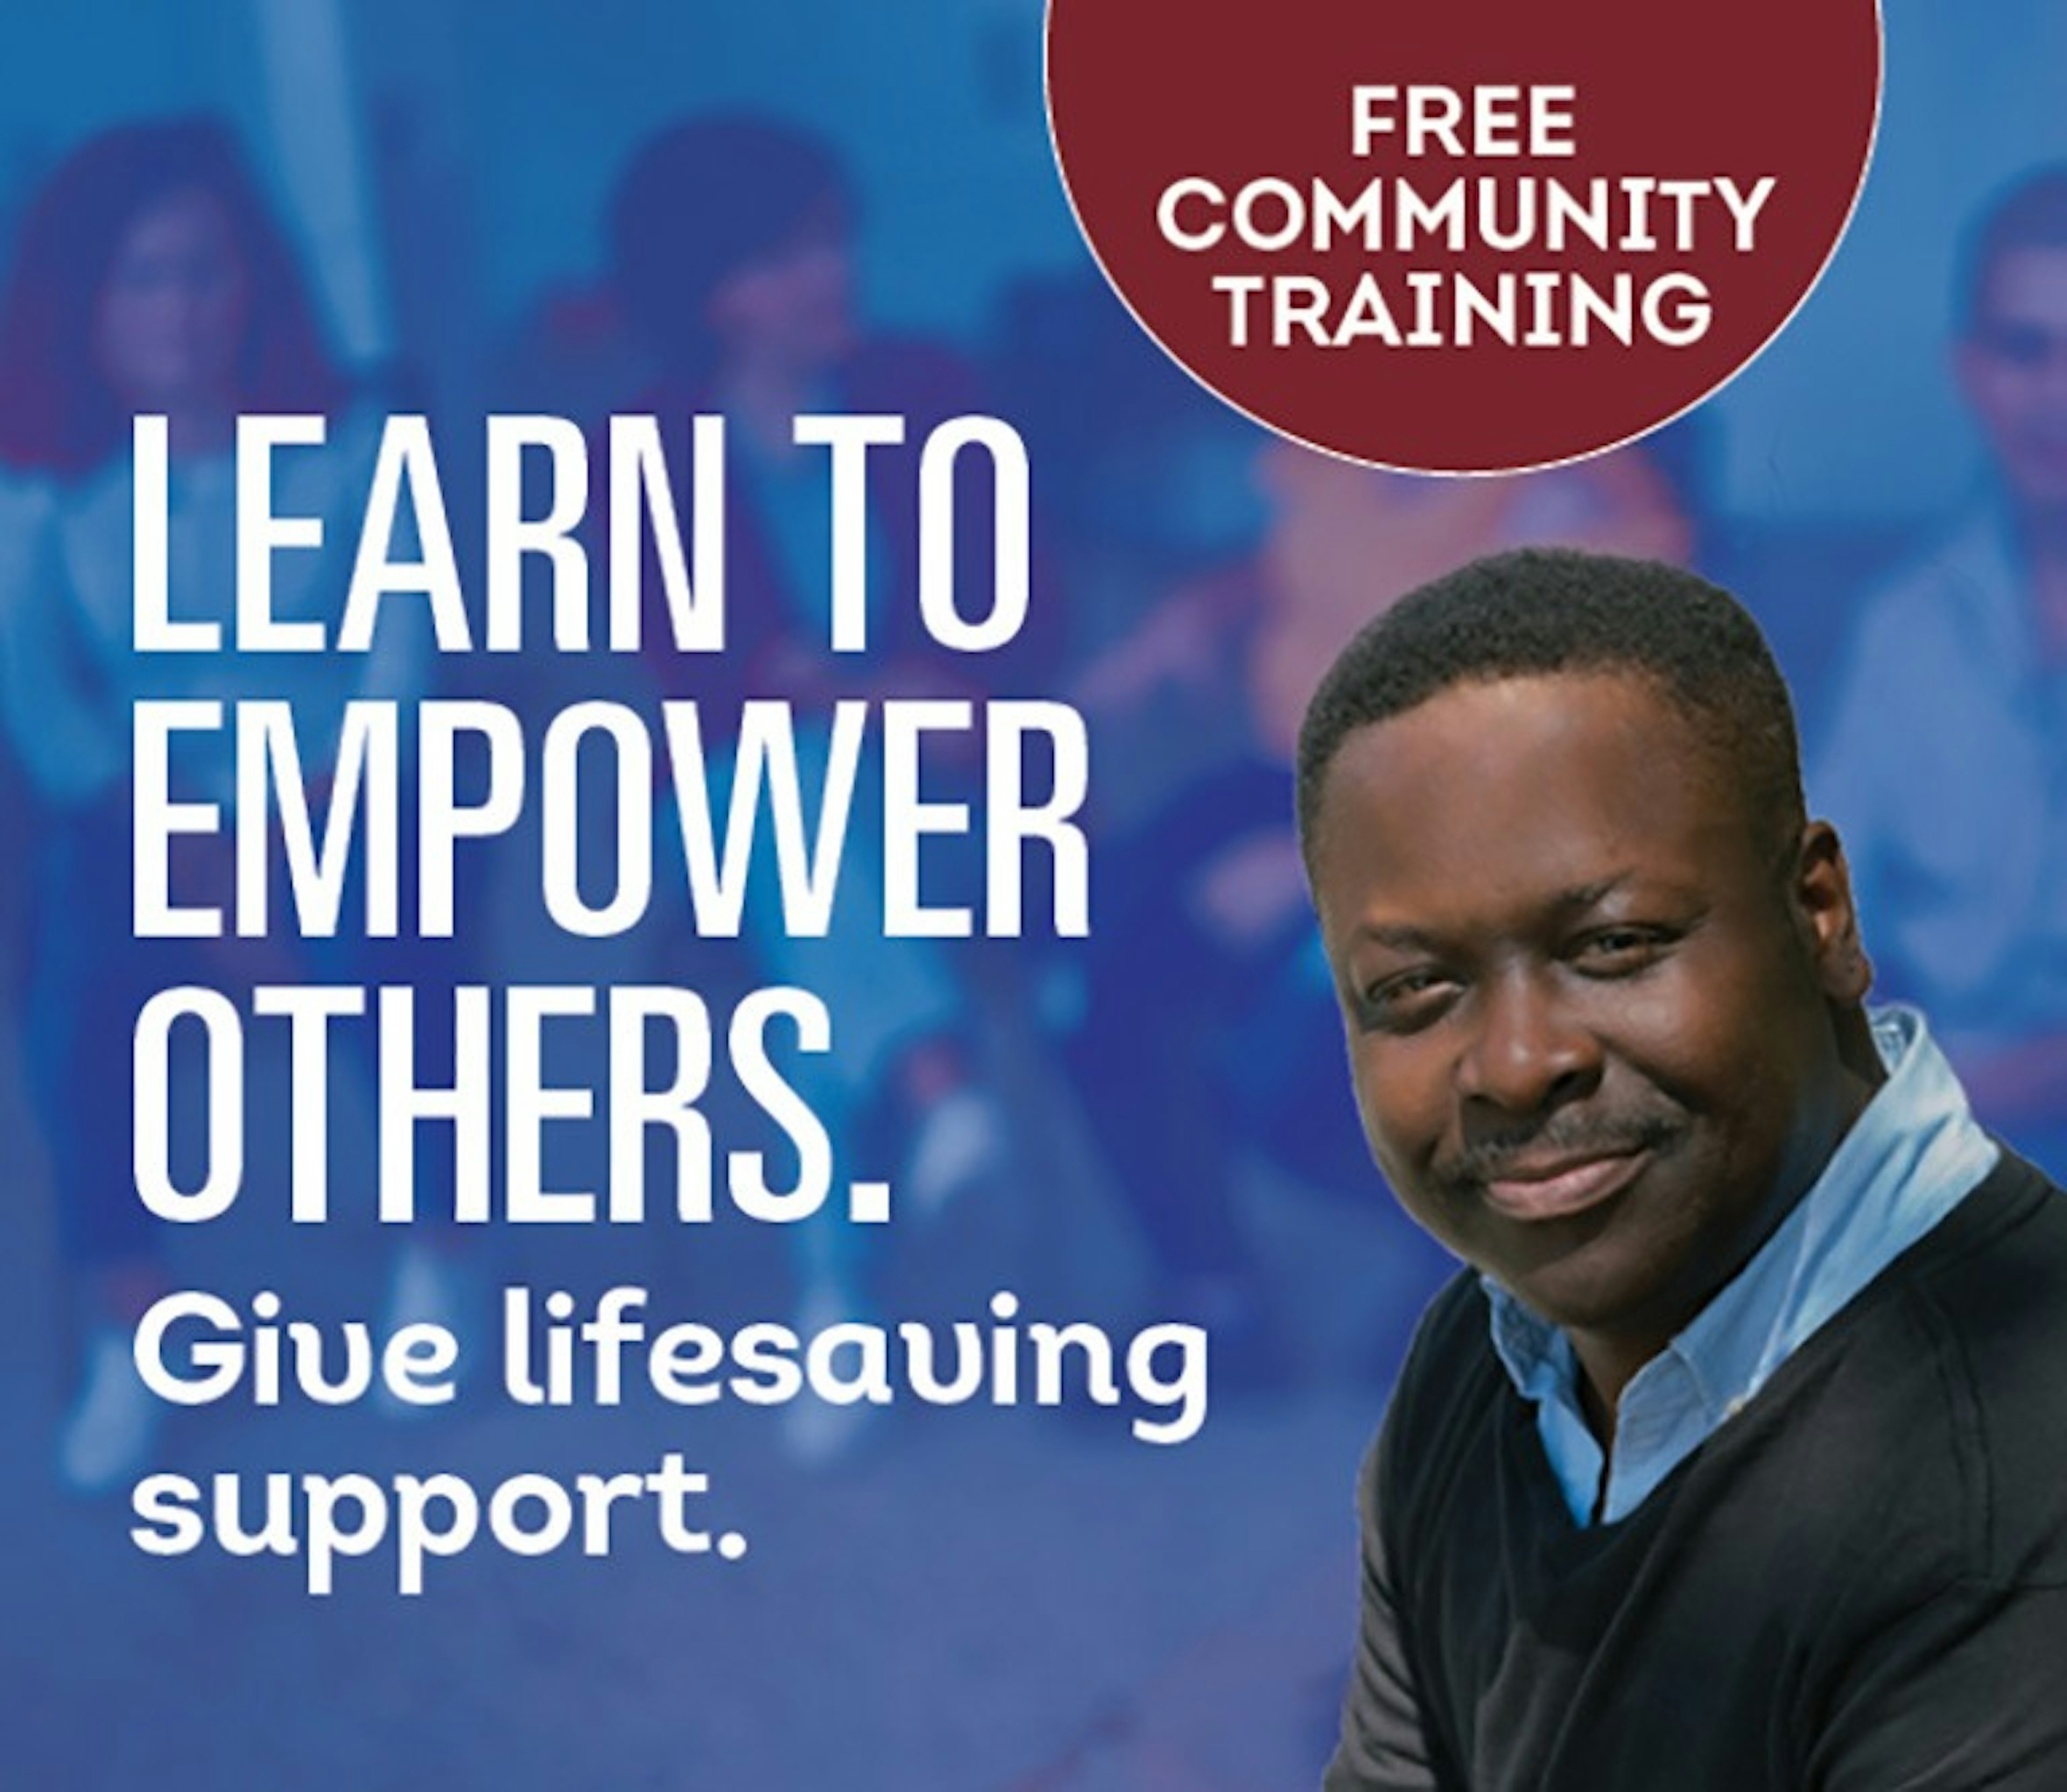 Free community training. Learn to empower others. Give lifesaving support.